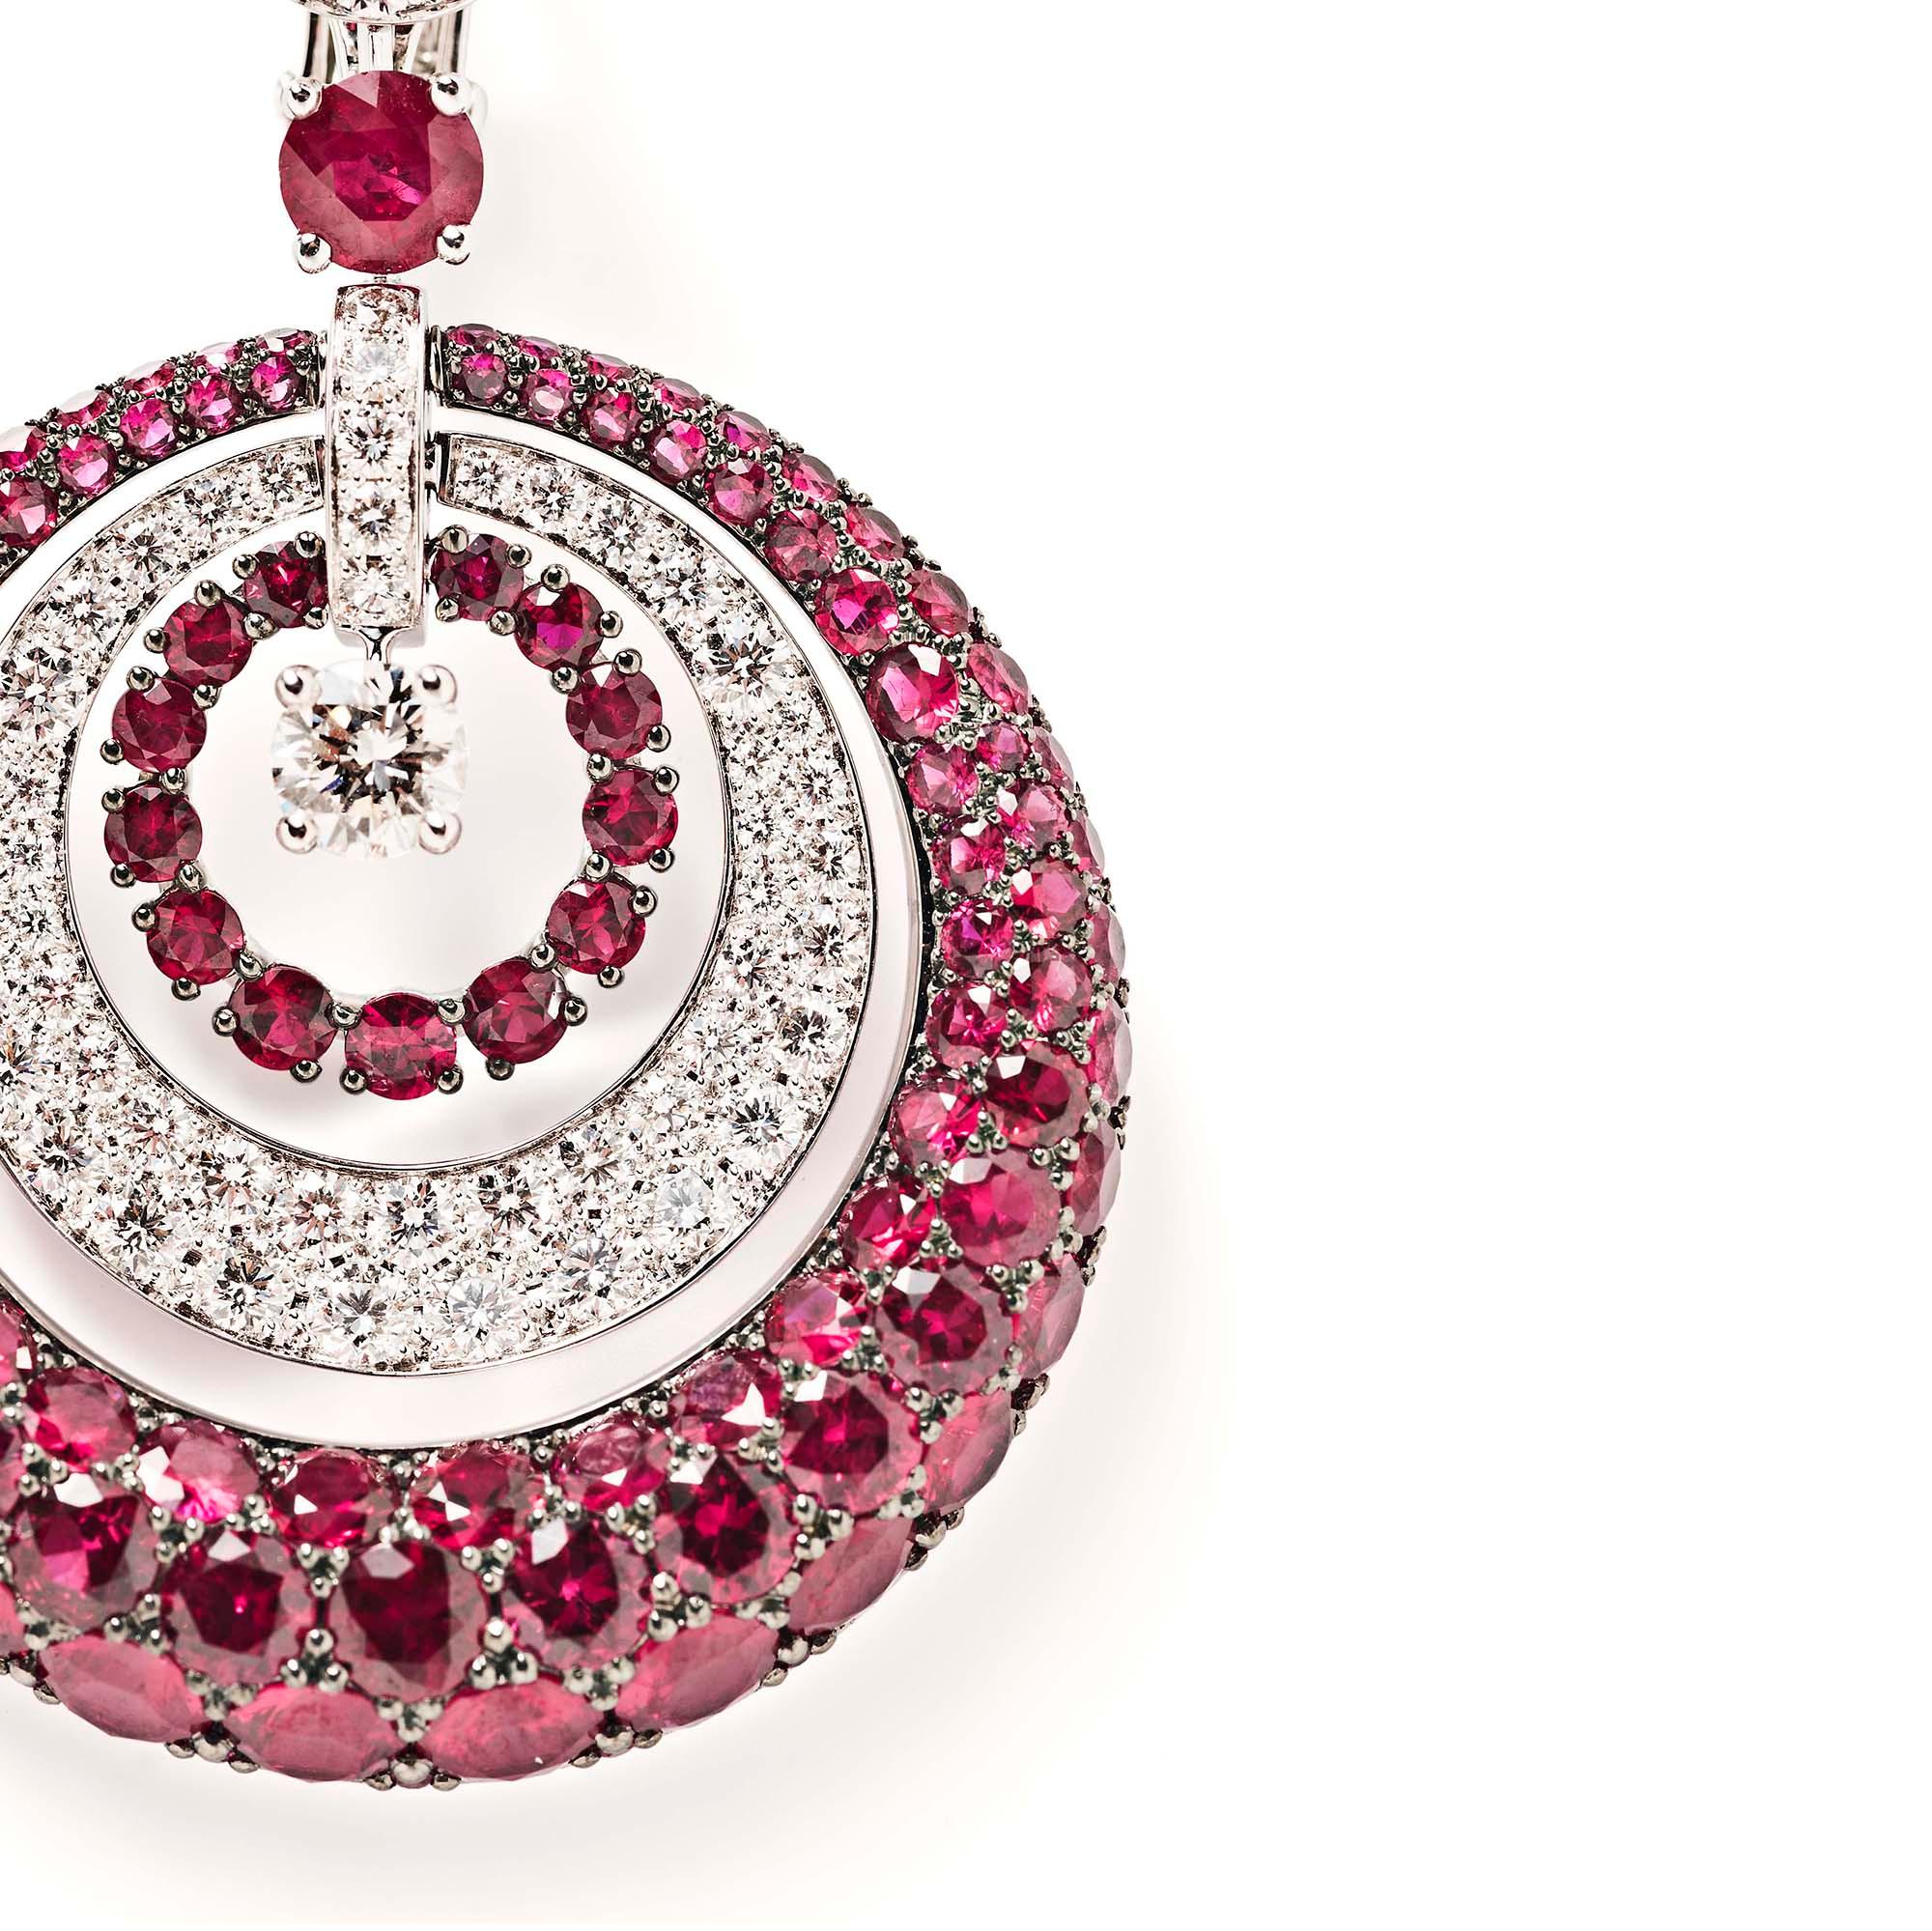 From its founding in 1960 Graff has staked its reputation on superior craftsmanship and stone quality. These impressive ruby and diamond earrings capture both principles of the house. The drop pendants are composed of concentric hoops generously set